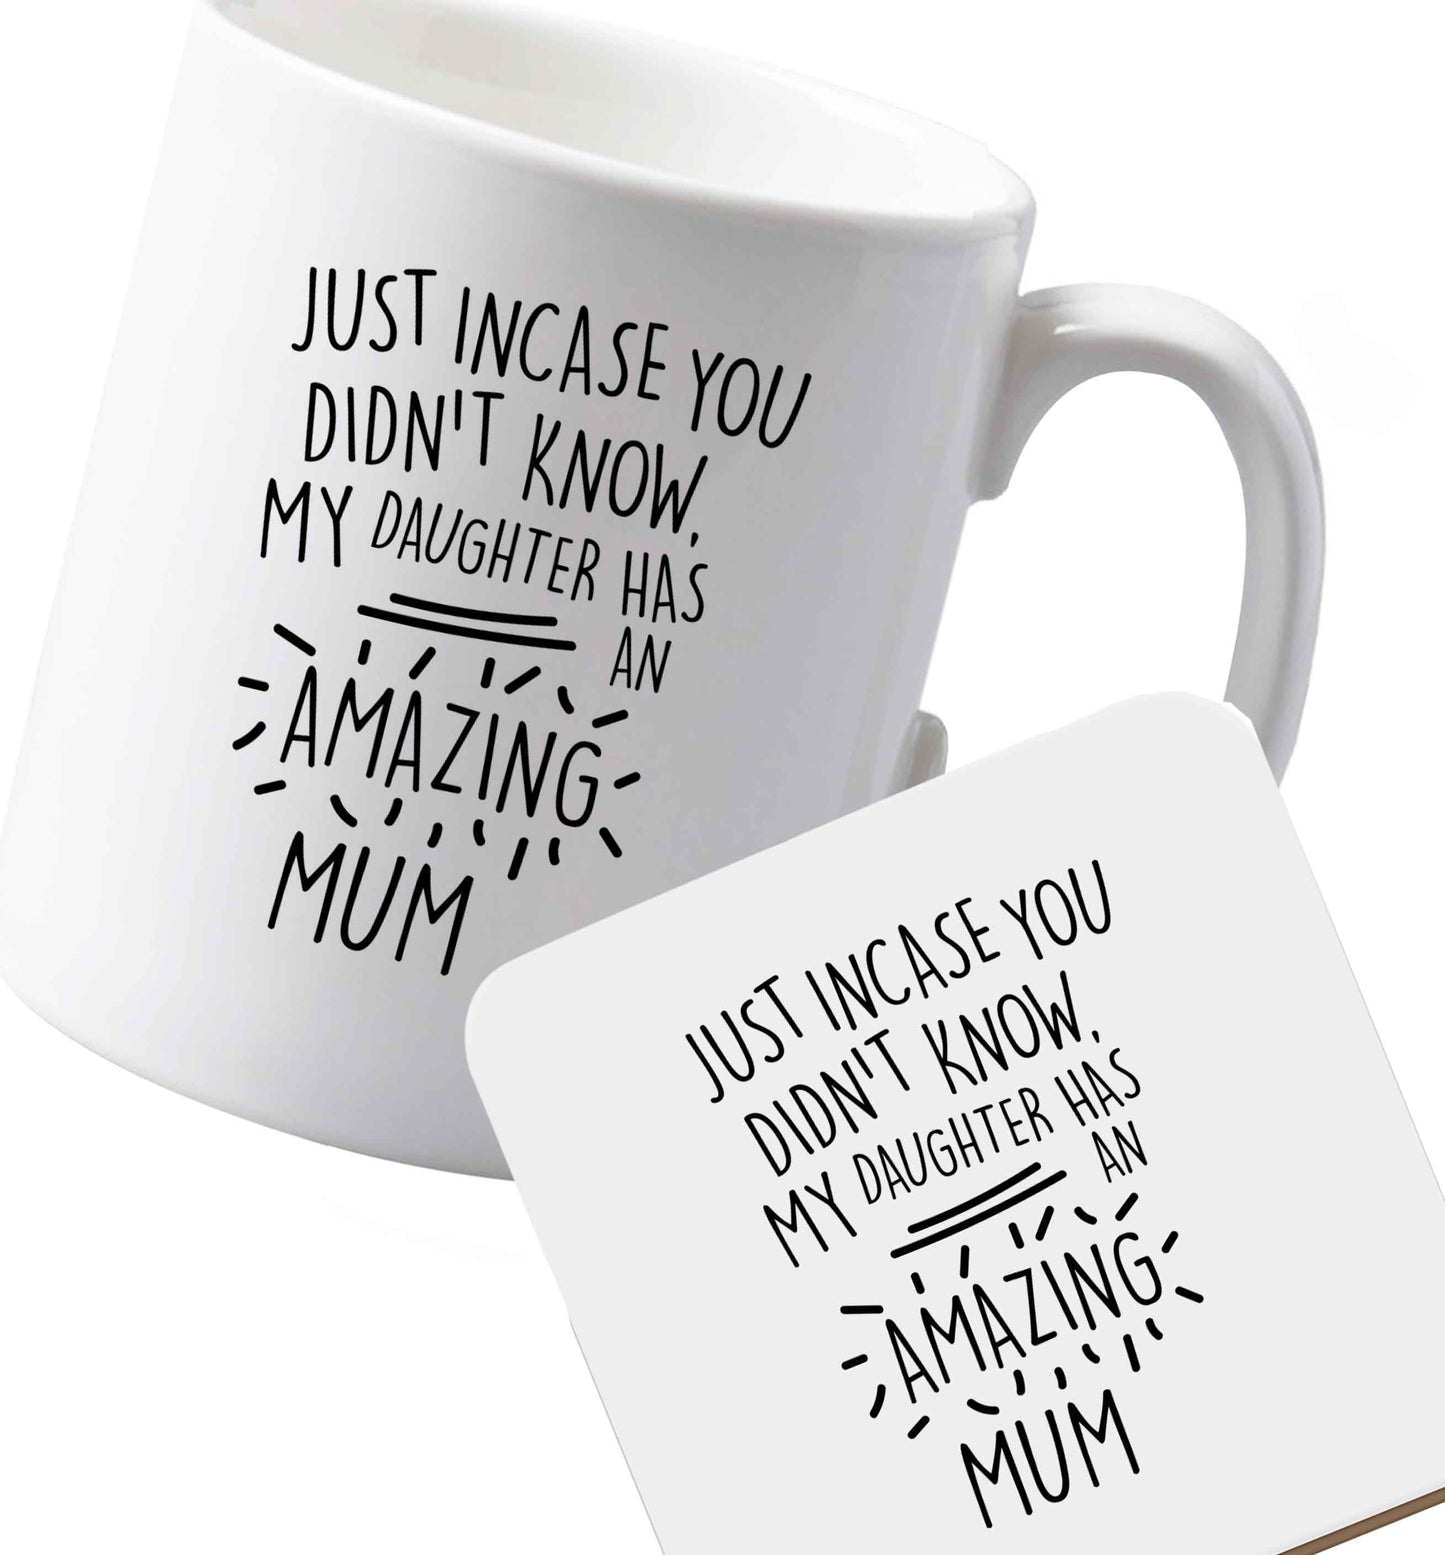 10 oz Ceramic mug and coaster Just incase you didn't know my daughter has an amazing mum both sides